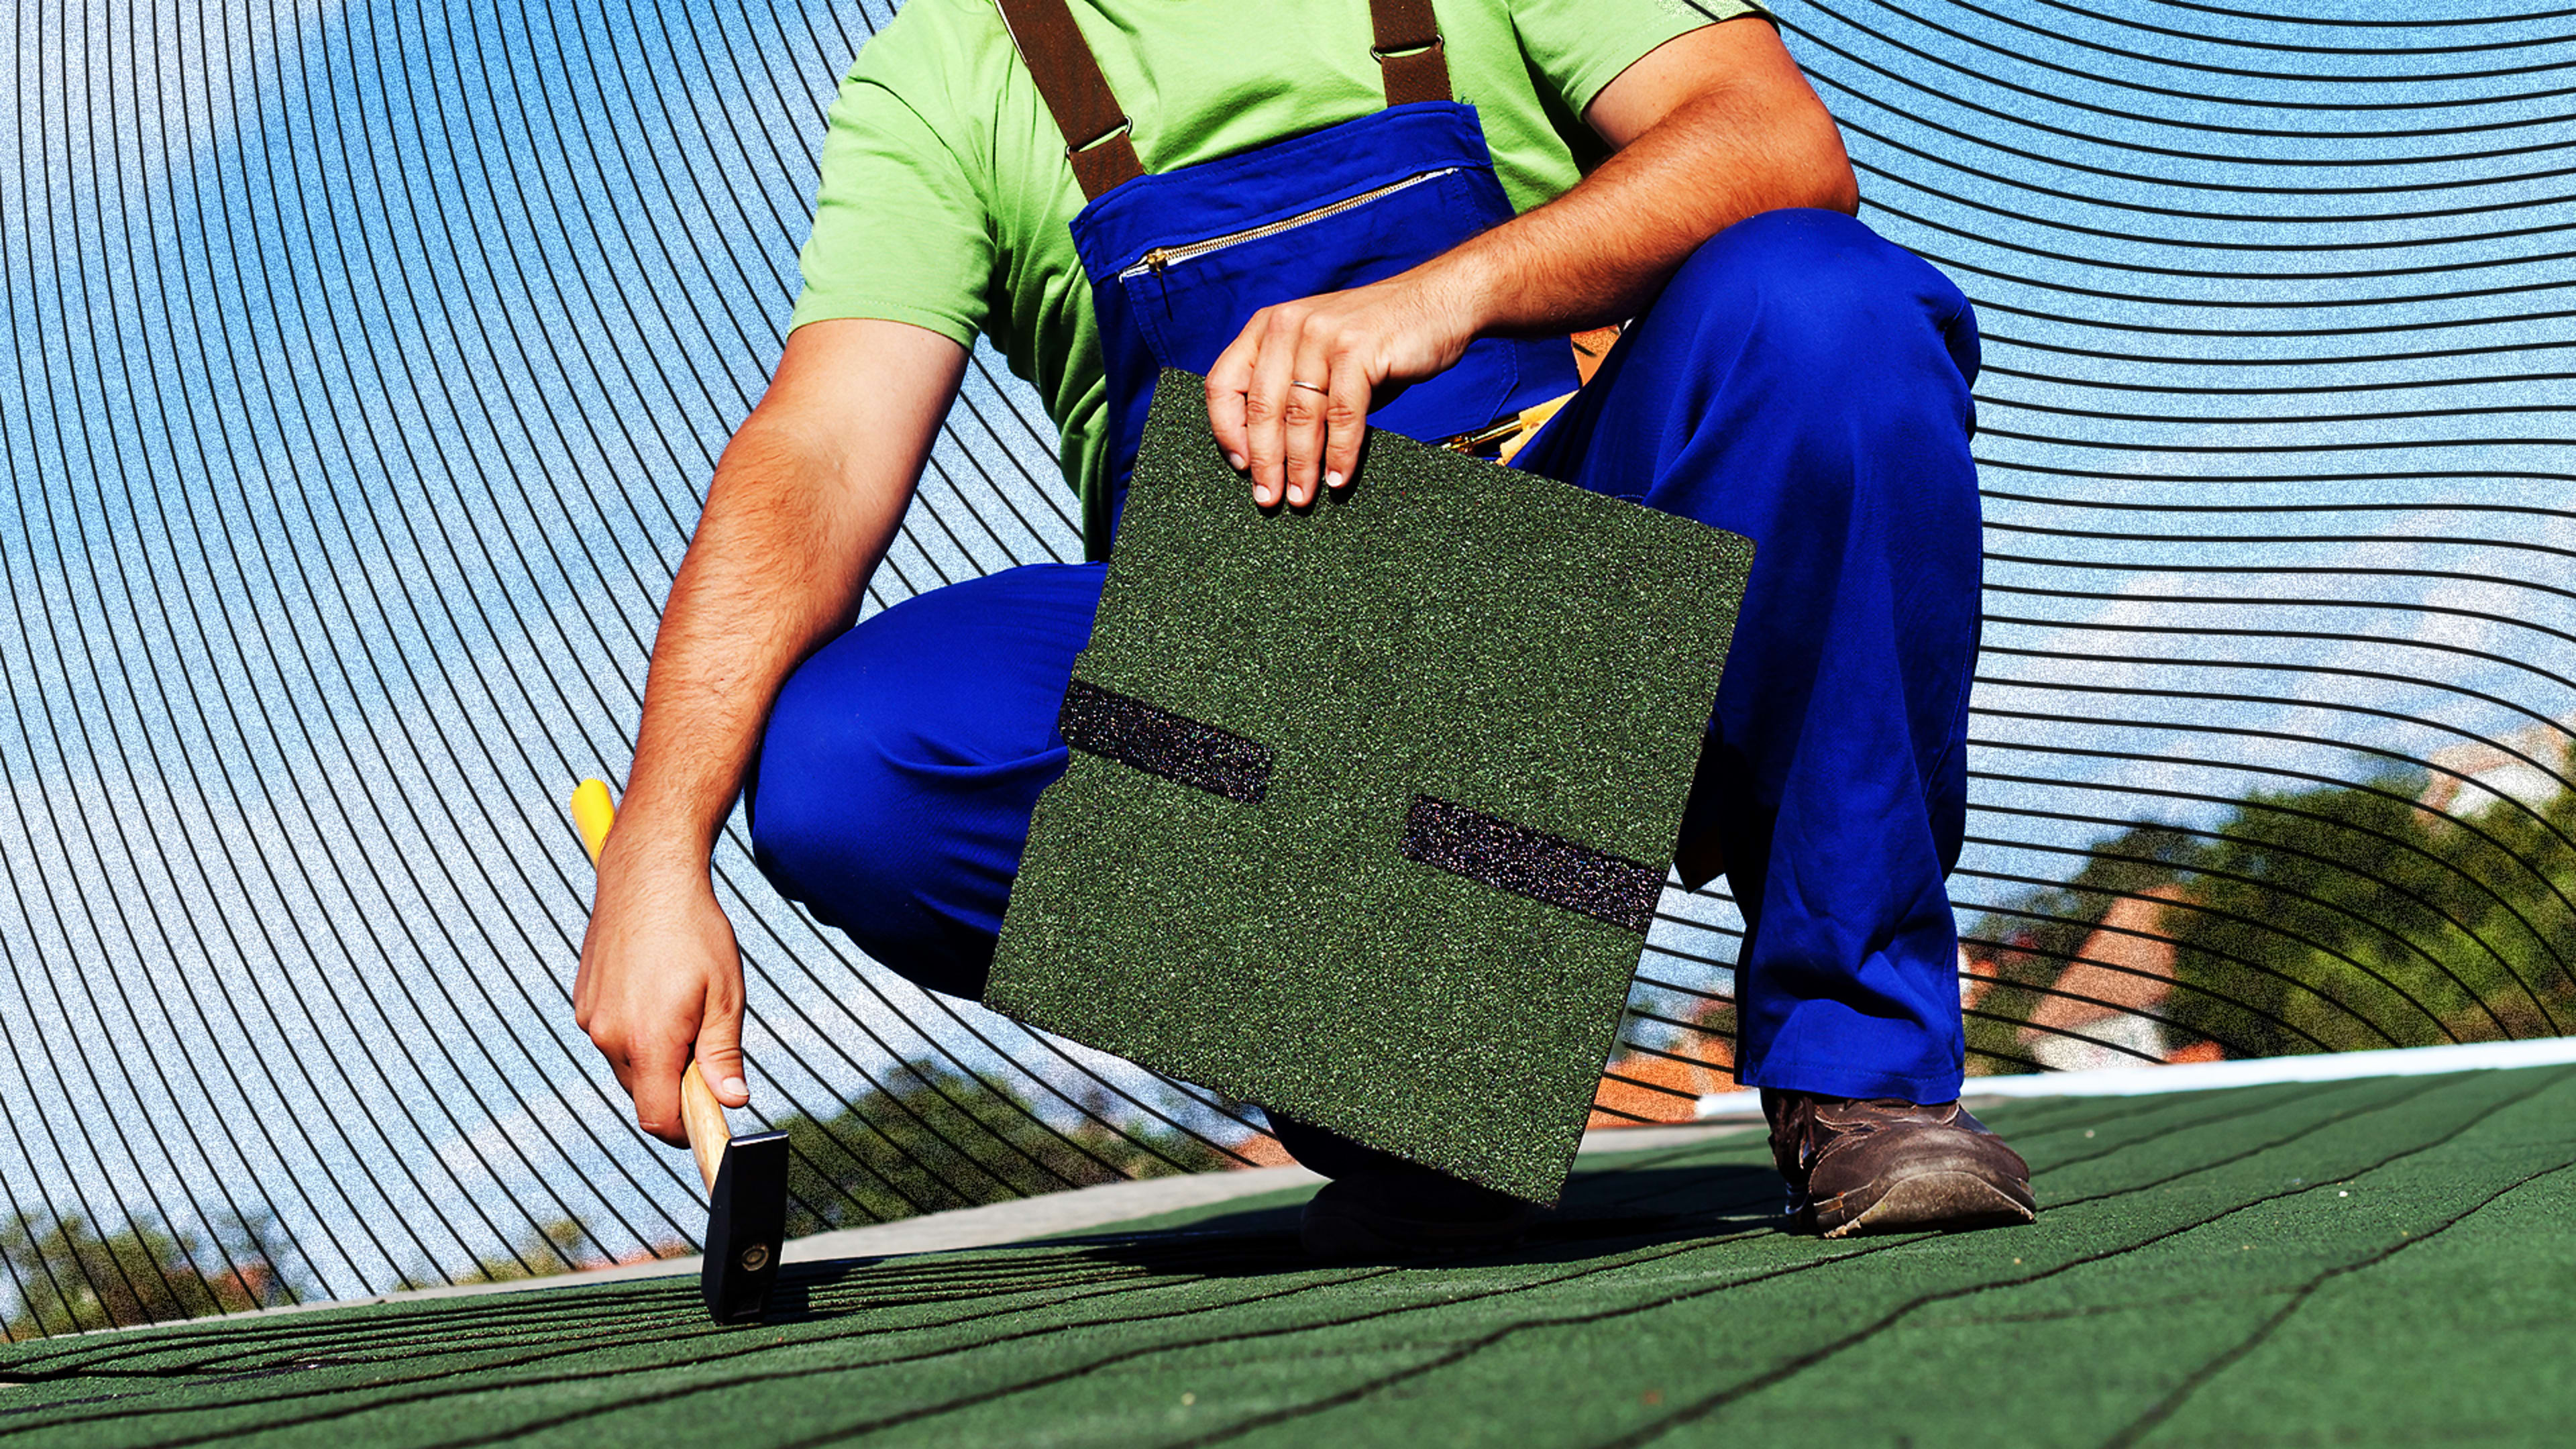 This giant roofing company just figured out how to recycle shingles